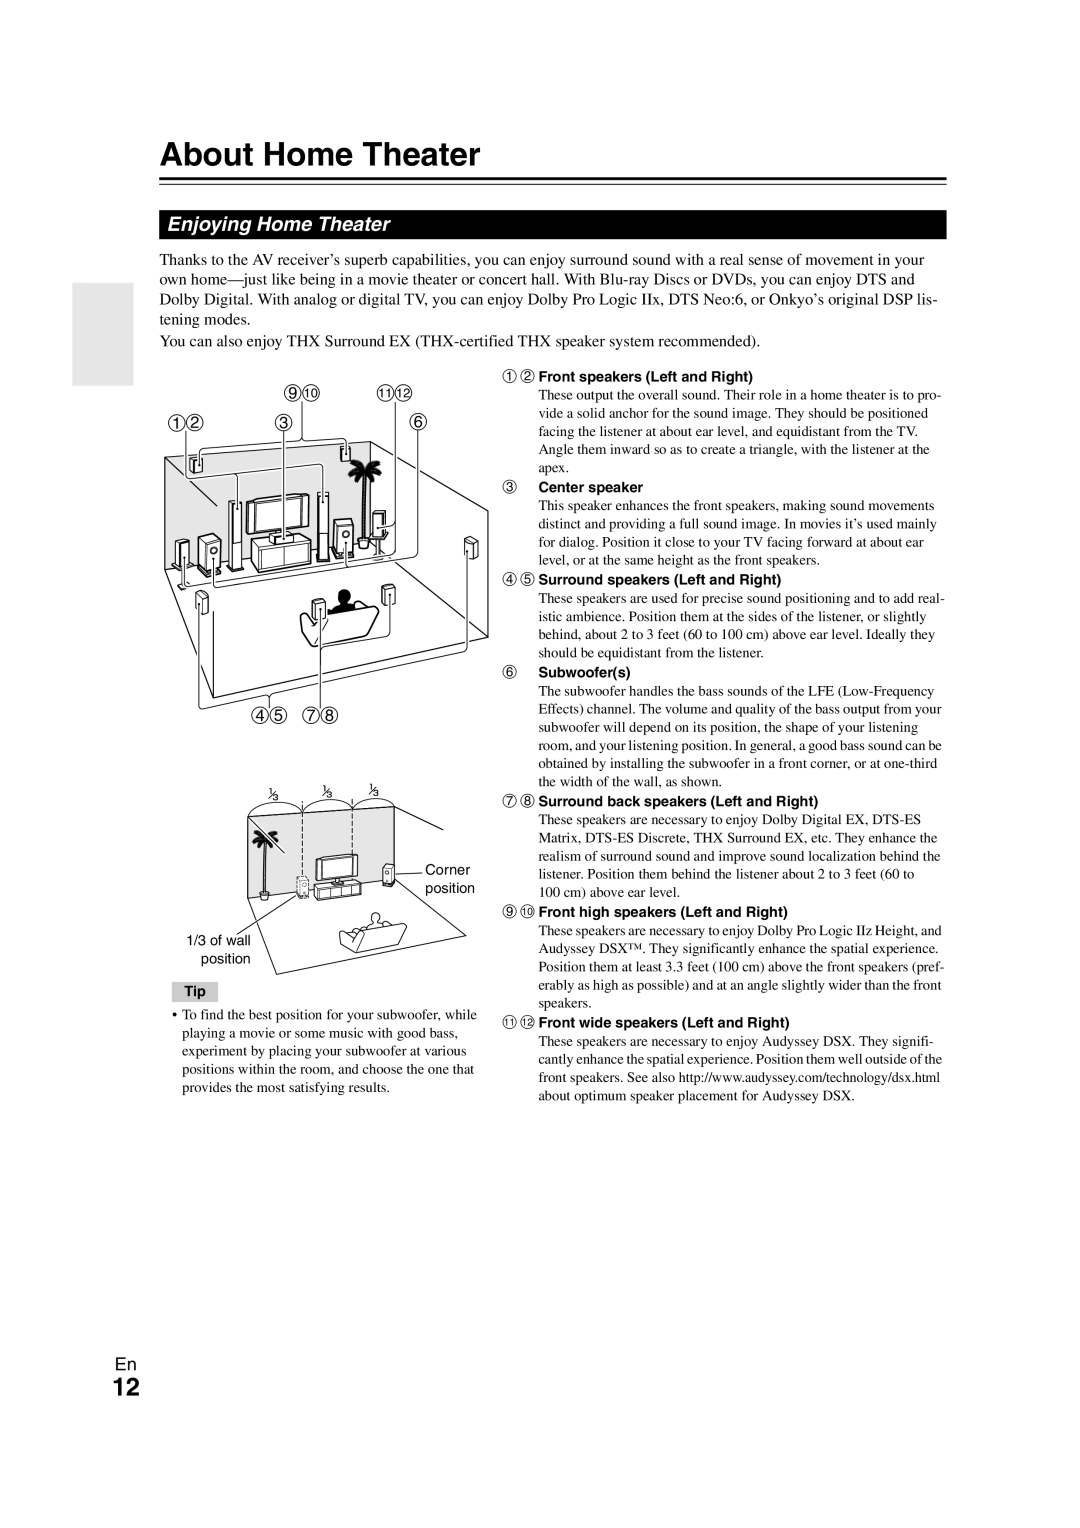 Onkyo TX-NR708 instruction manual About Home Theater, Enjoying Home Theater, ij kl, de gh 